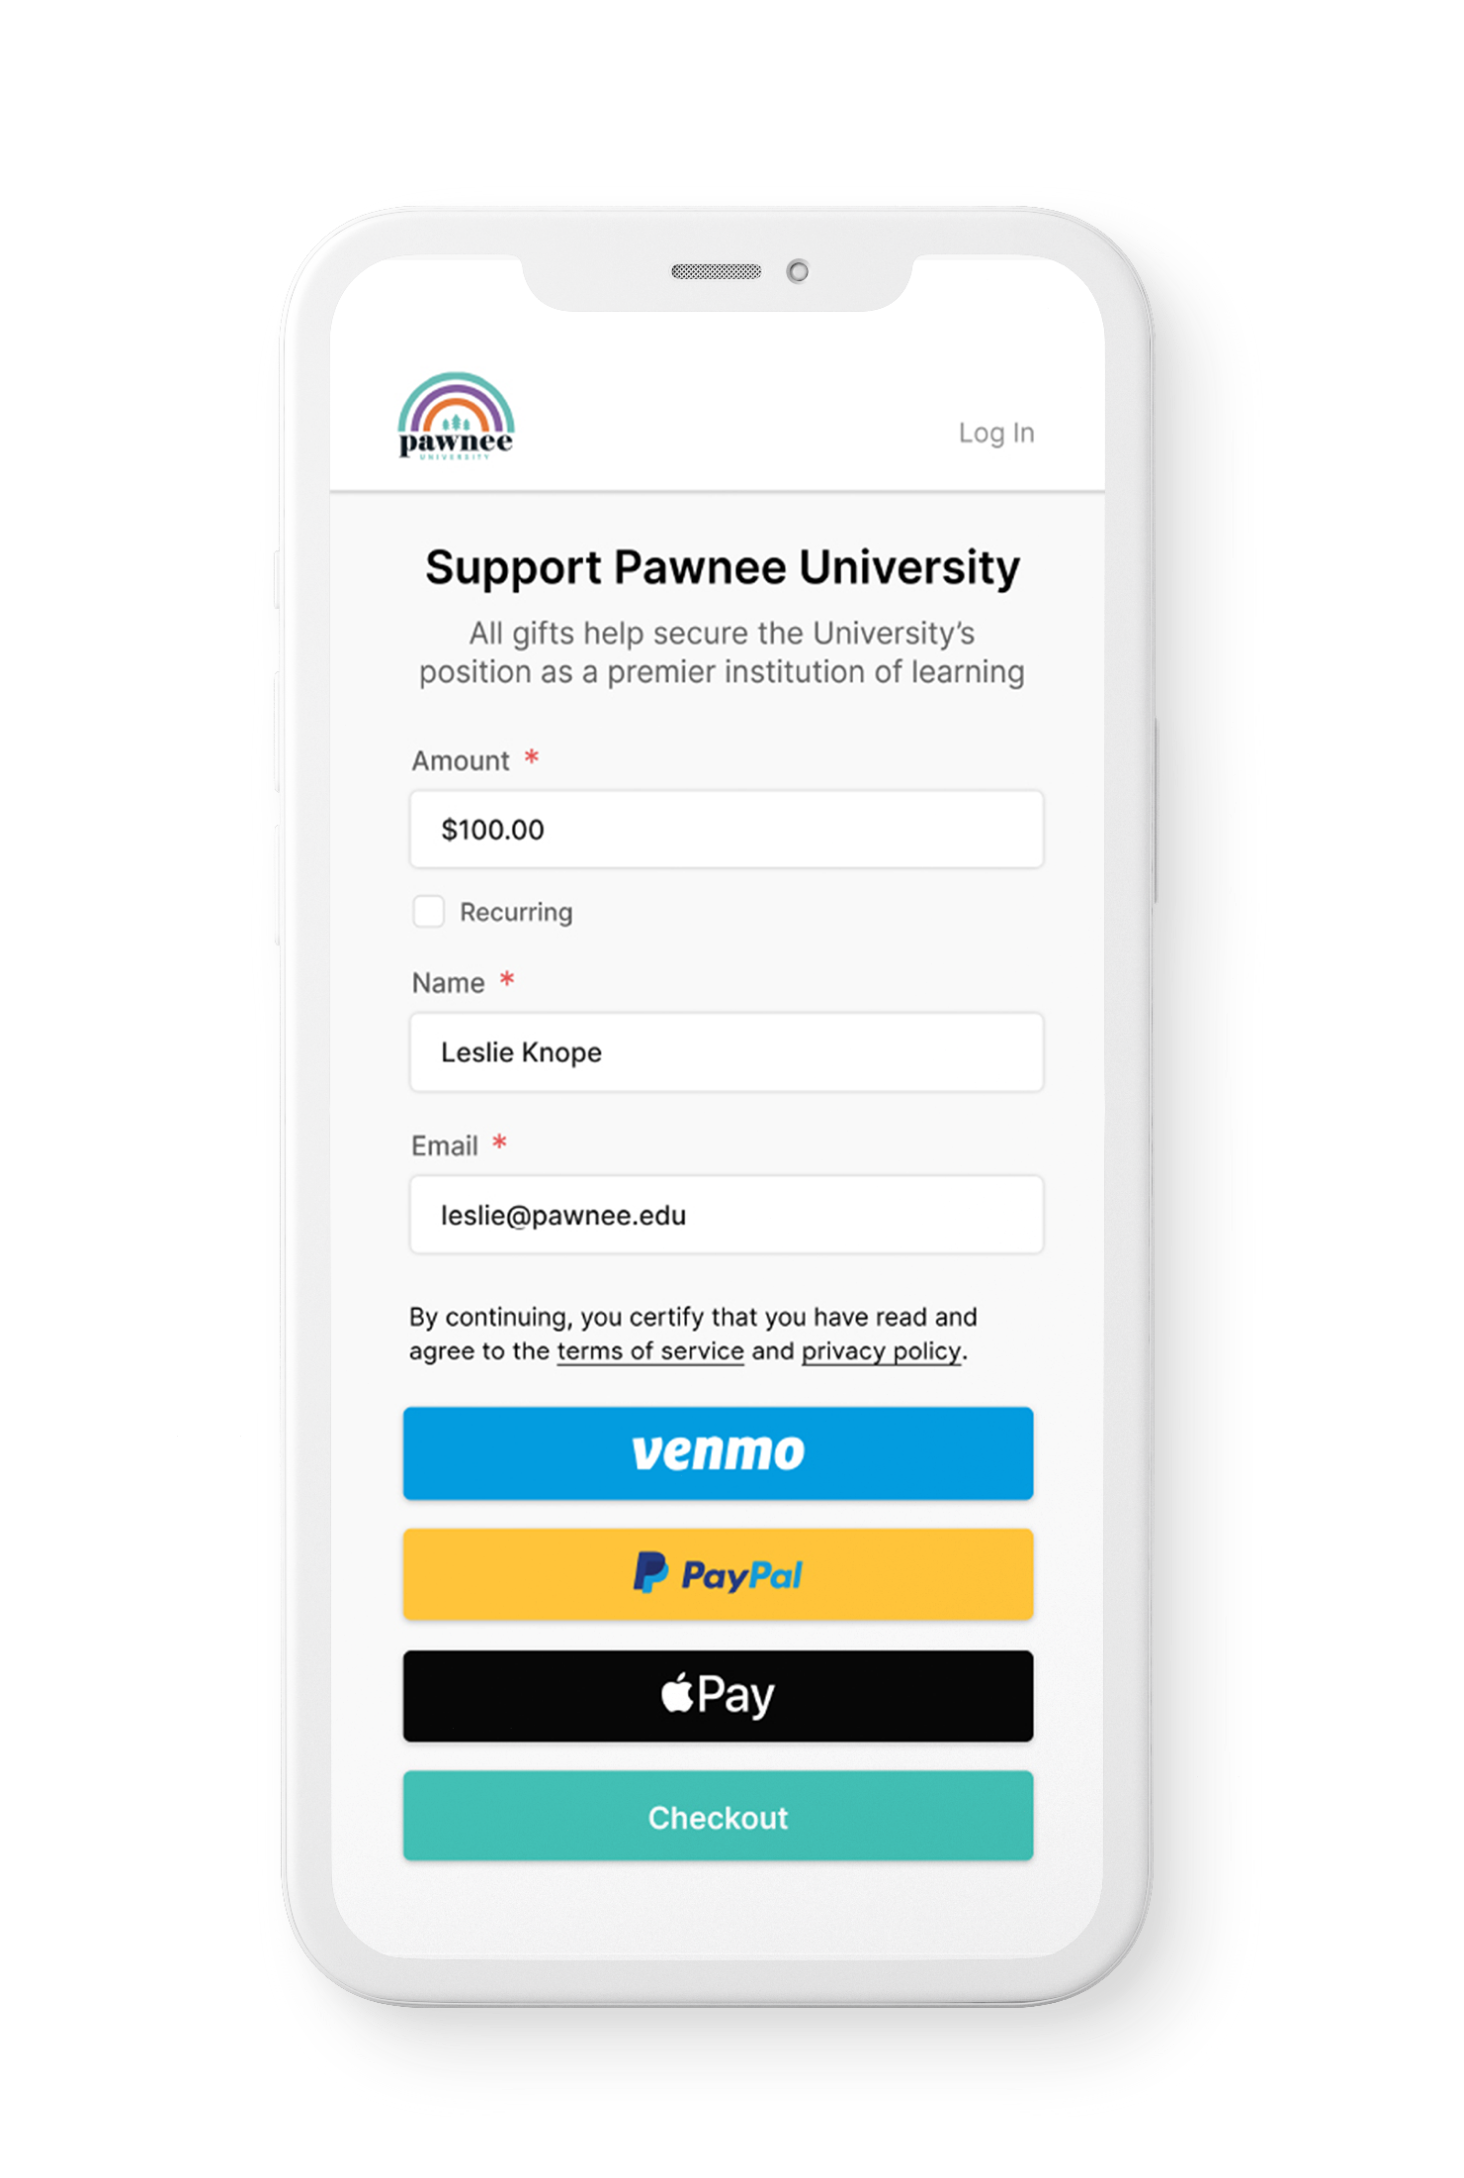 Giving form displayed on a mobile phone with prominent Venmo, PayPal, and ApplePay buttons.